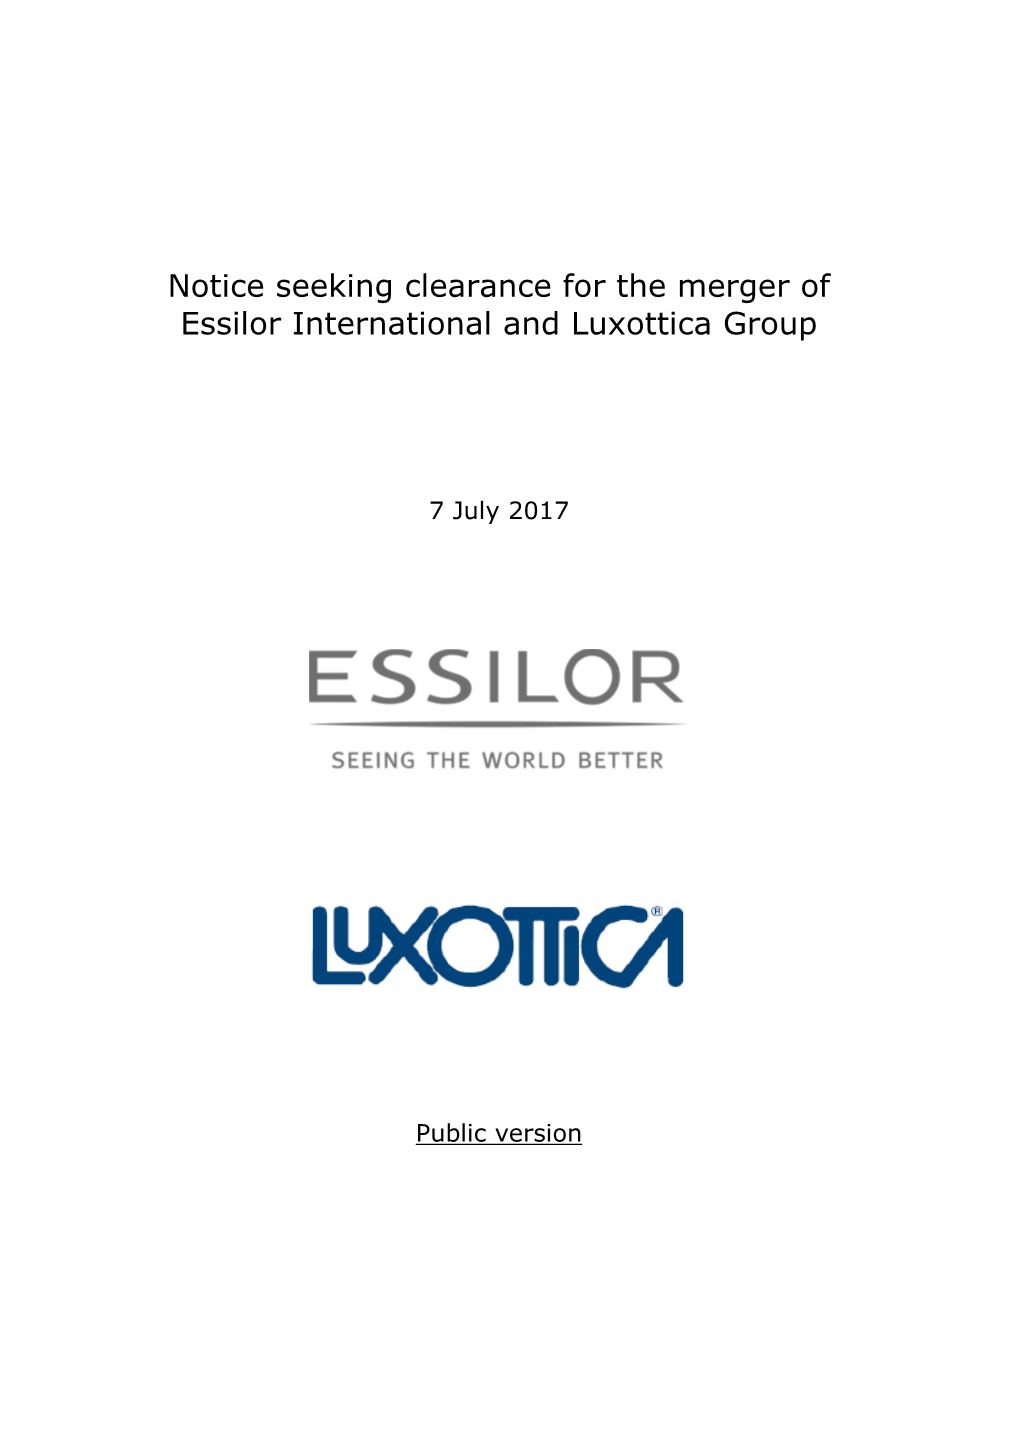 Notice Seeking Clearance for the Merger of Essilor International and Luxottica Group